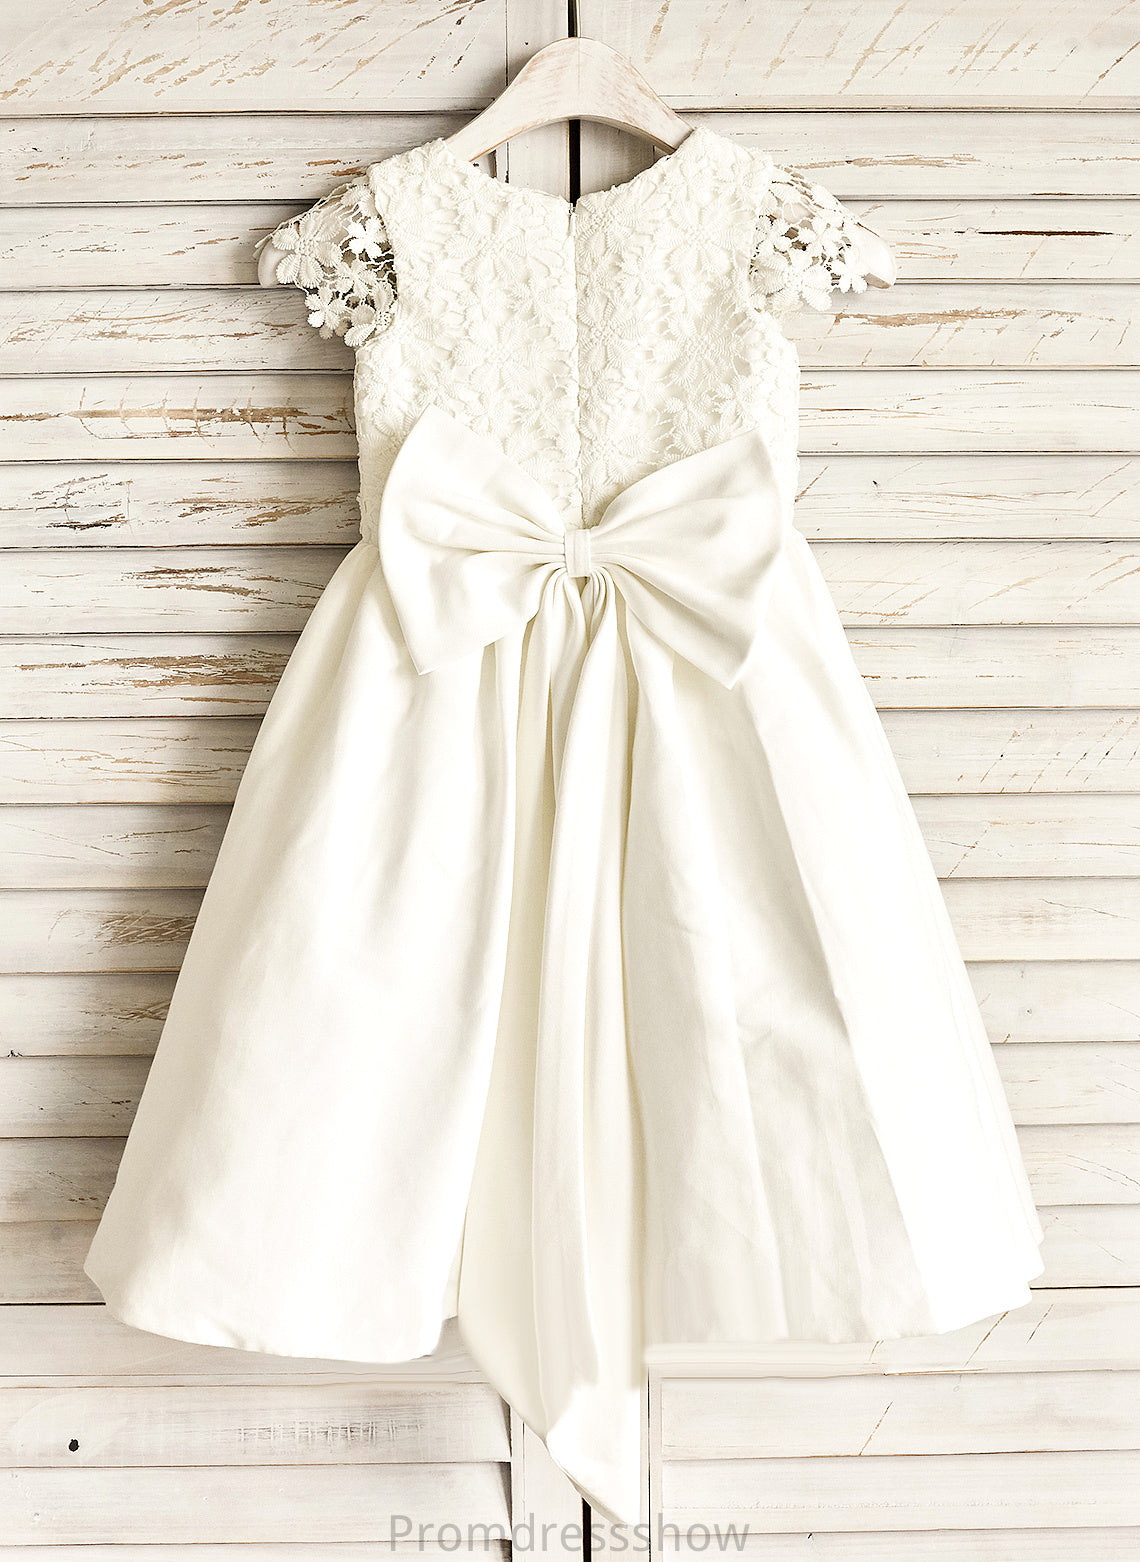 Dress Satin Flower Girl Dresses Sleeveless - A-Line With Girl Scoop Knee-length Lace/Bow(s) Neck Princess Flower